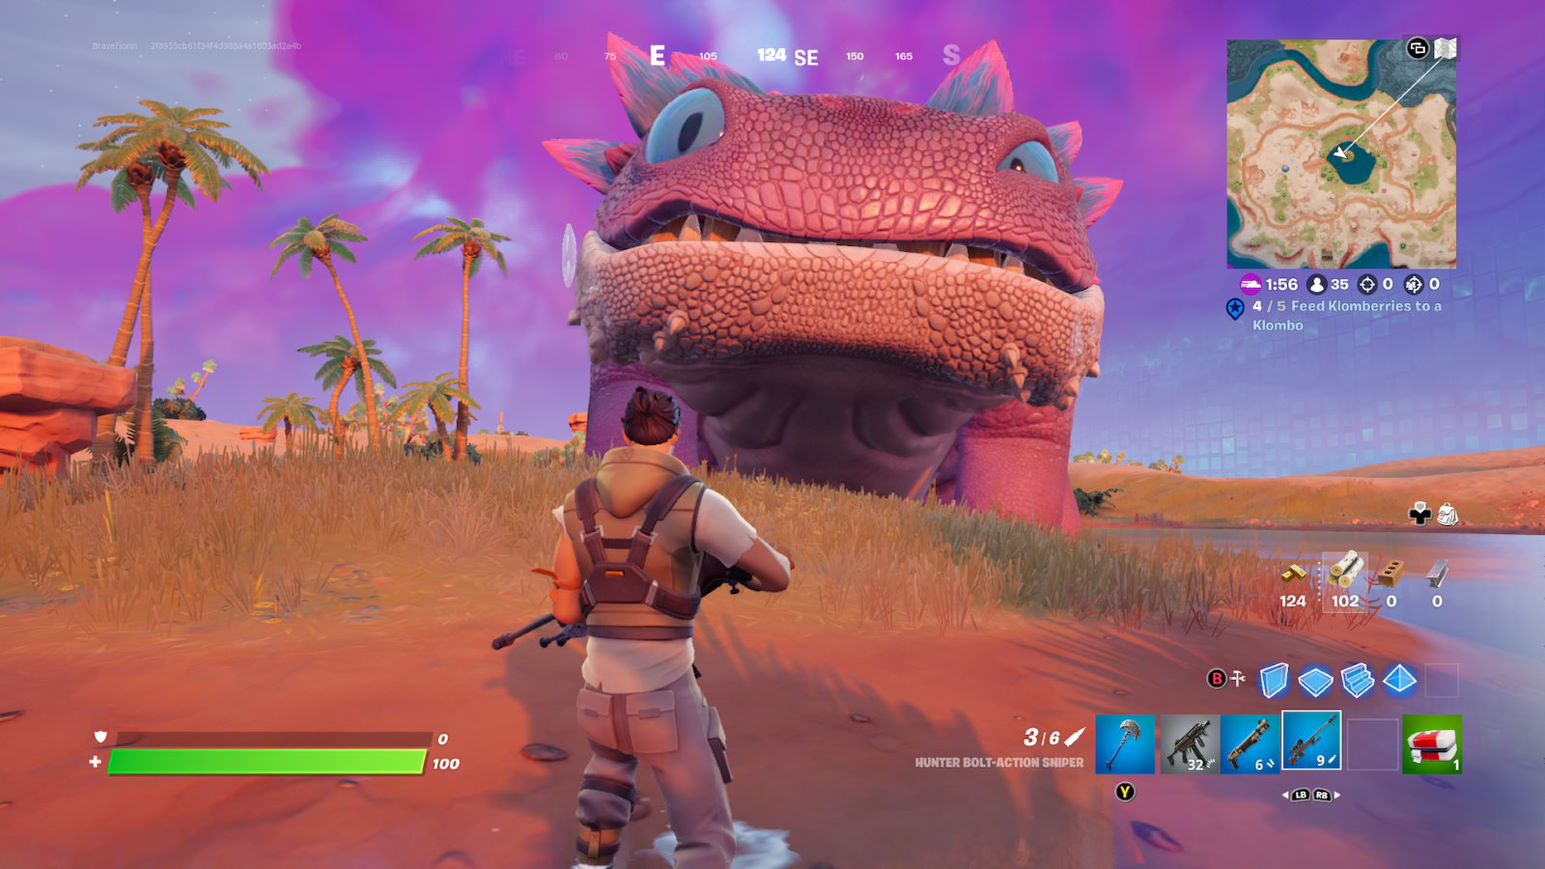 Image for How to feed klomberries to a Klombo in Fortnite